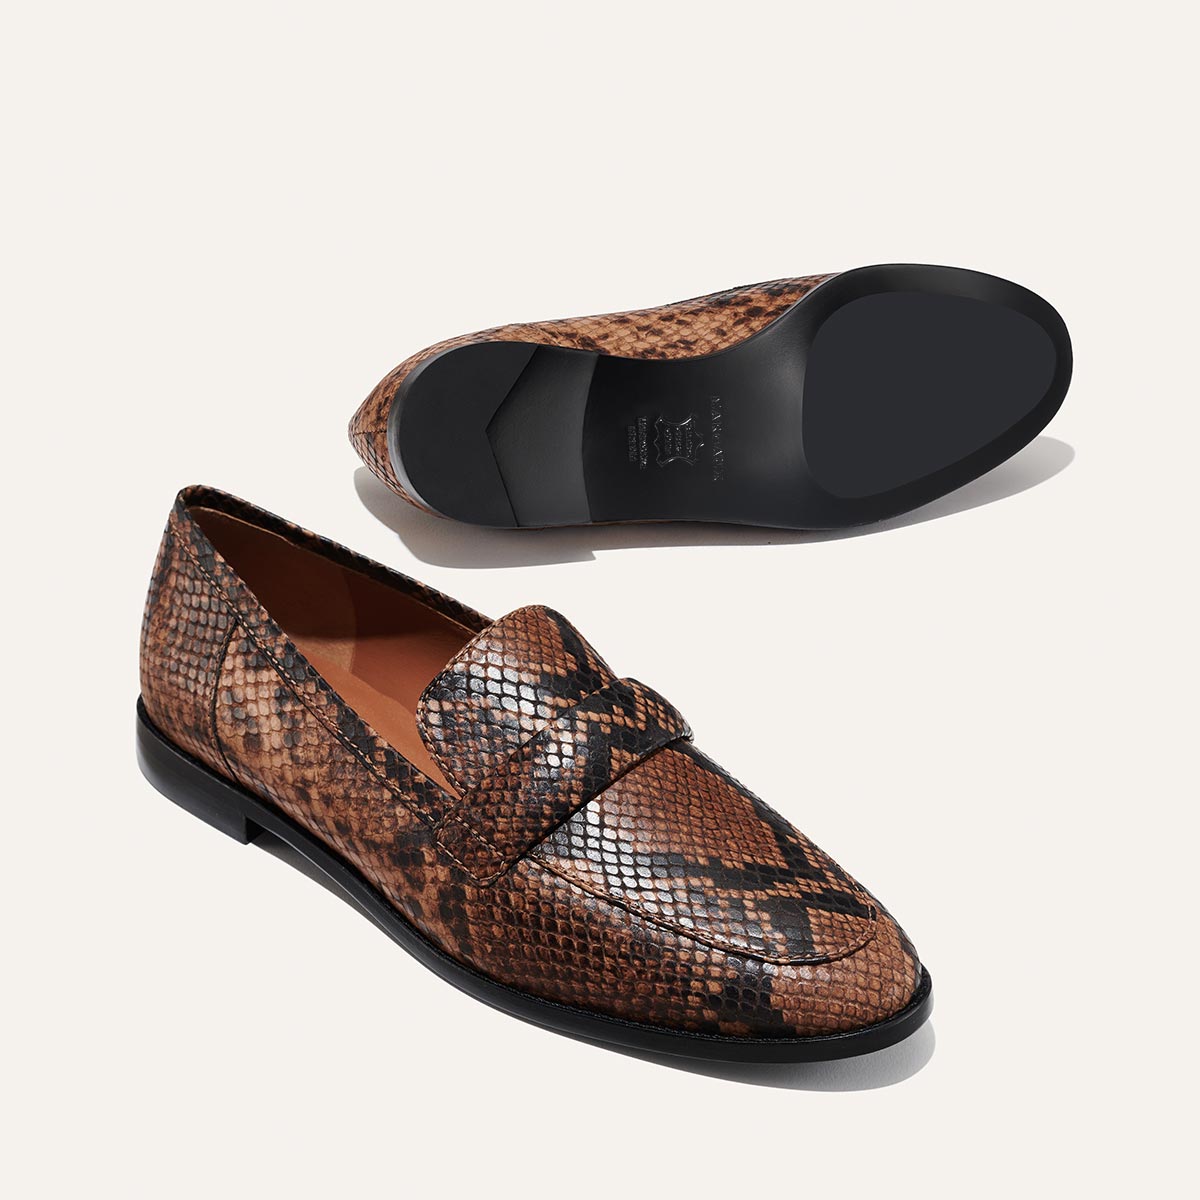 The Andie Loafer - Espresso Python Embossed